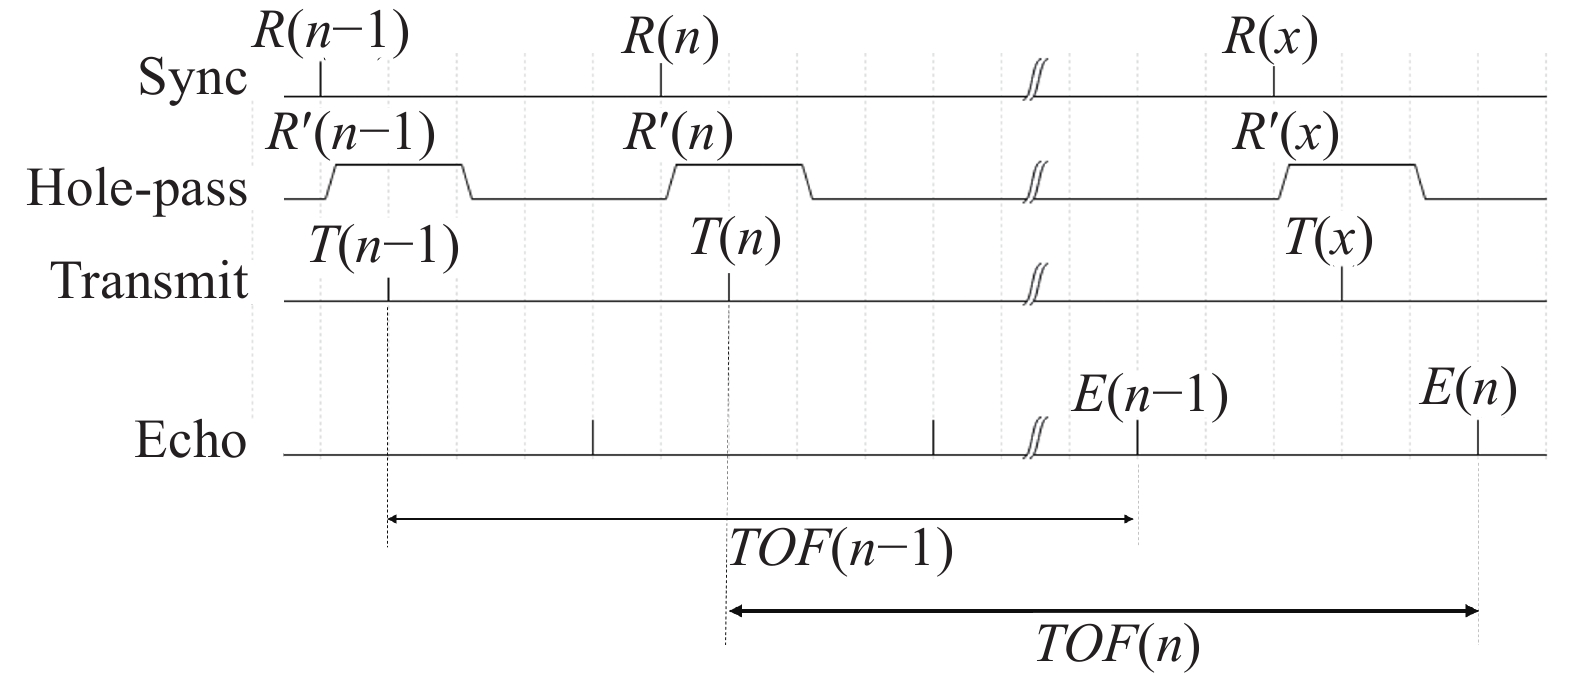 Time sequence of signals in ranging